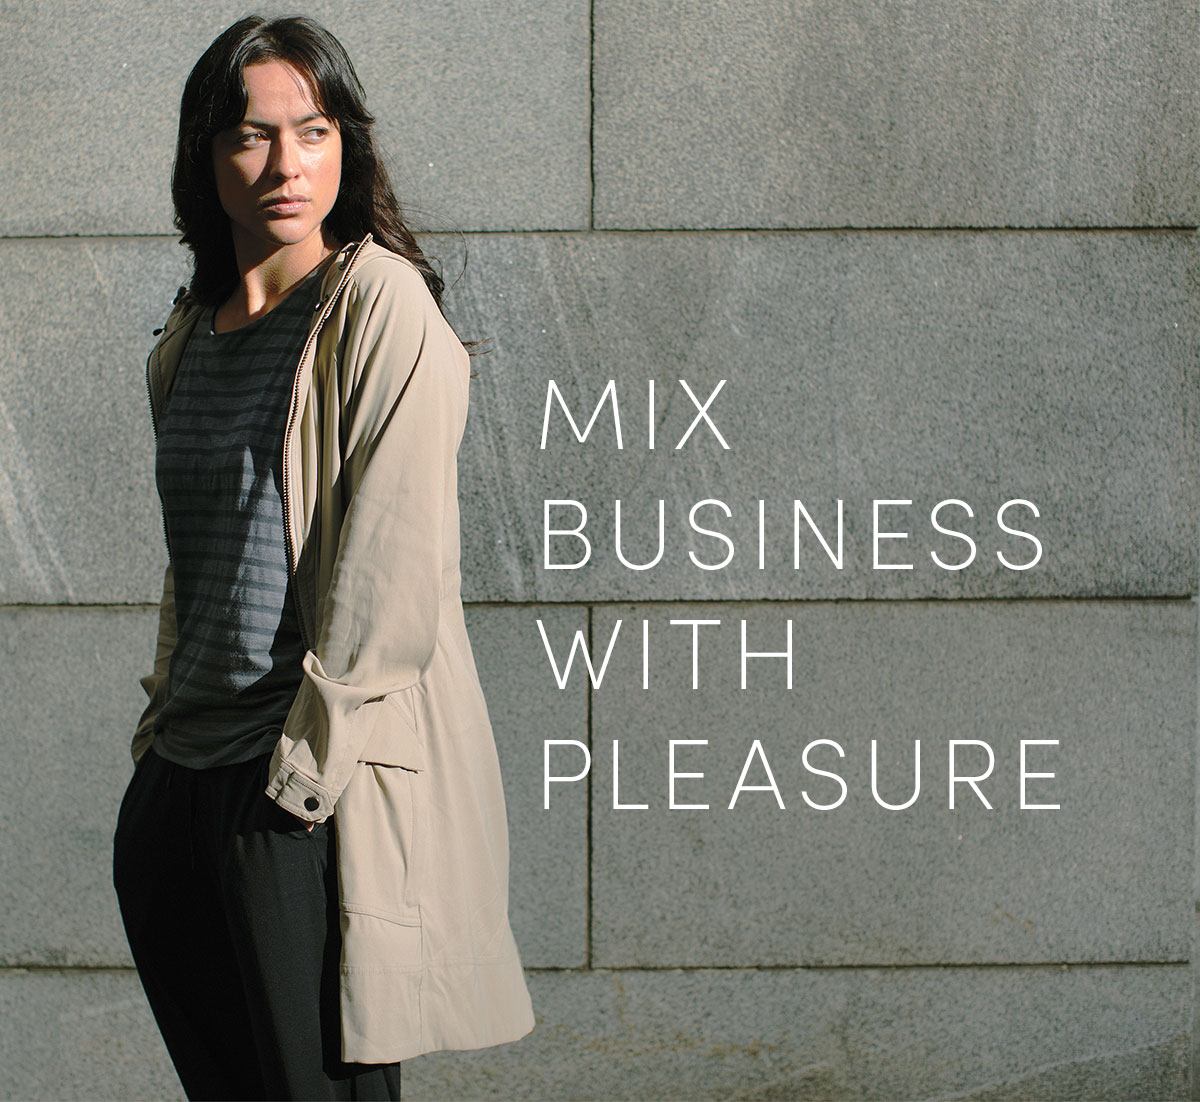 Mix business with pleasure